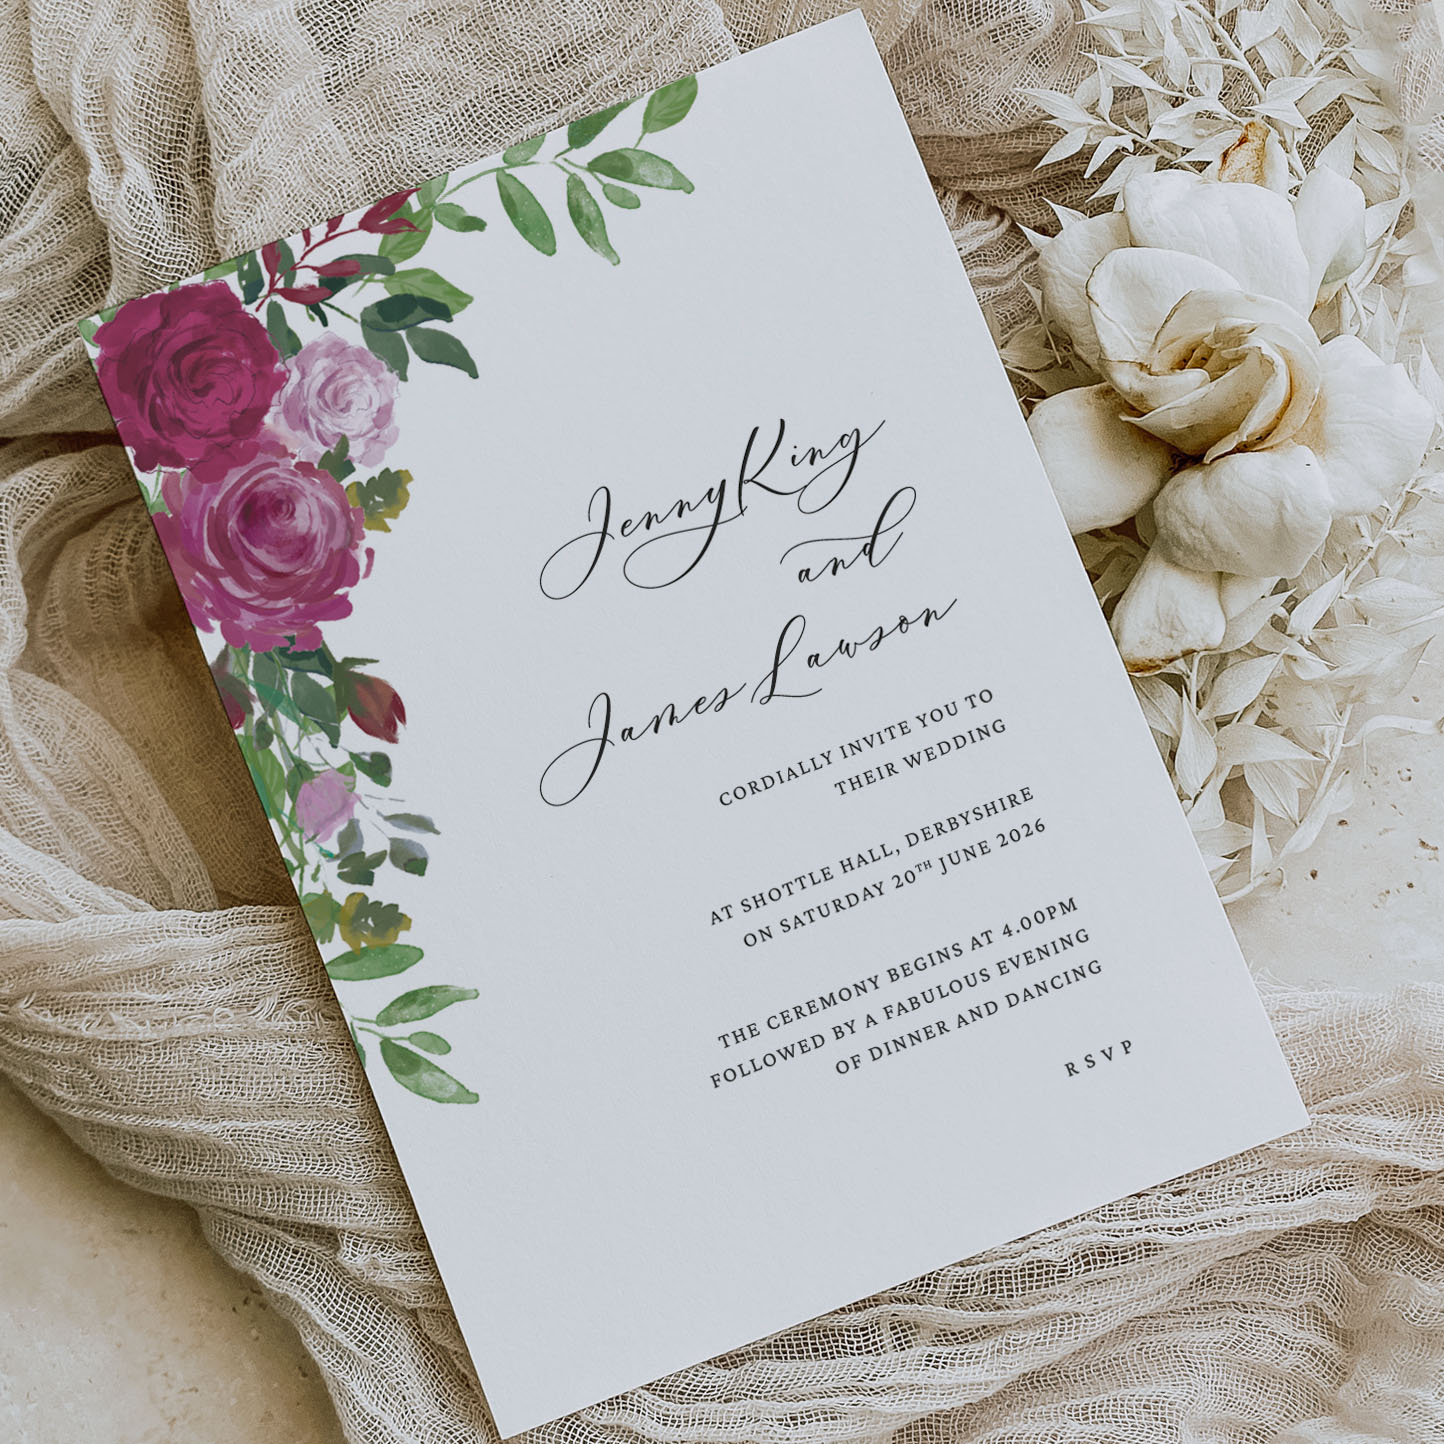 showing Rosa red rose floral wedding invitation